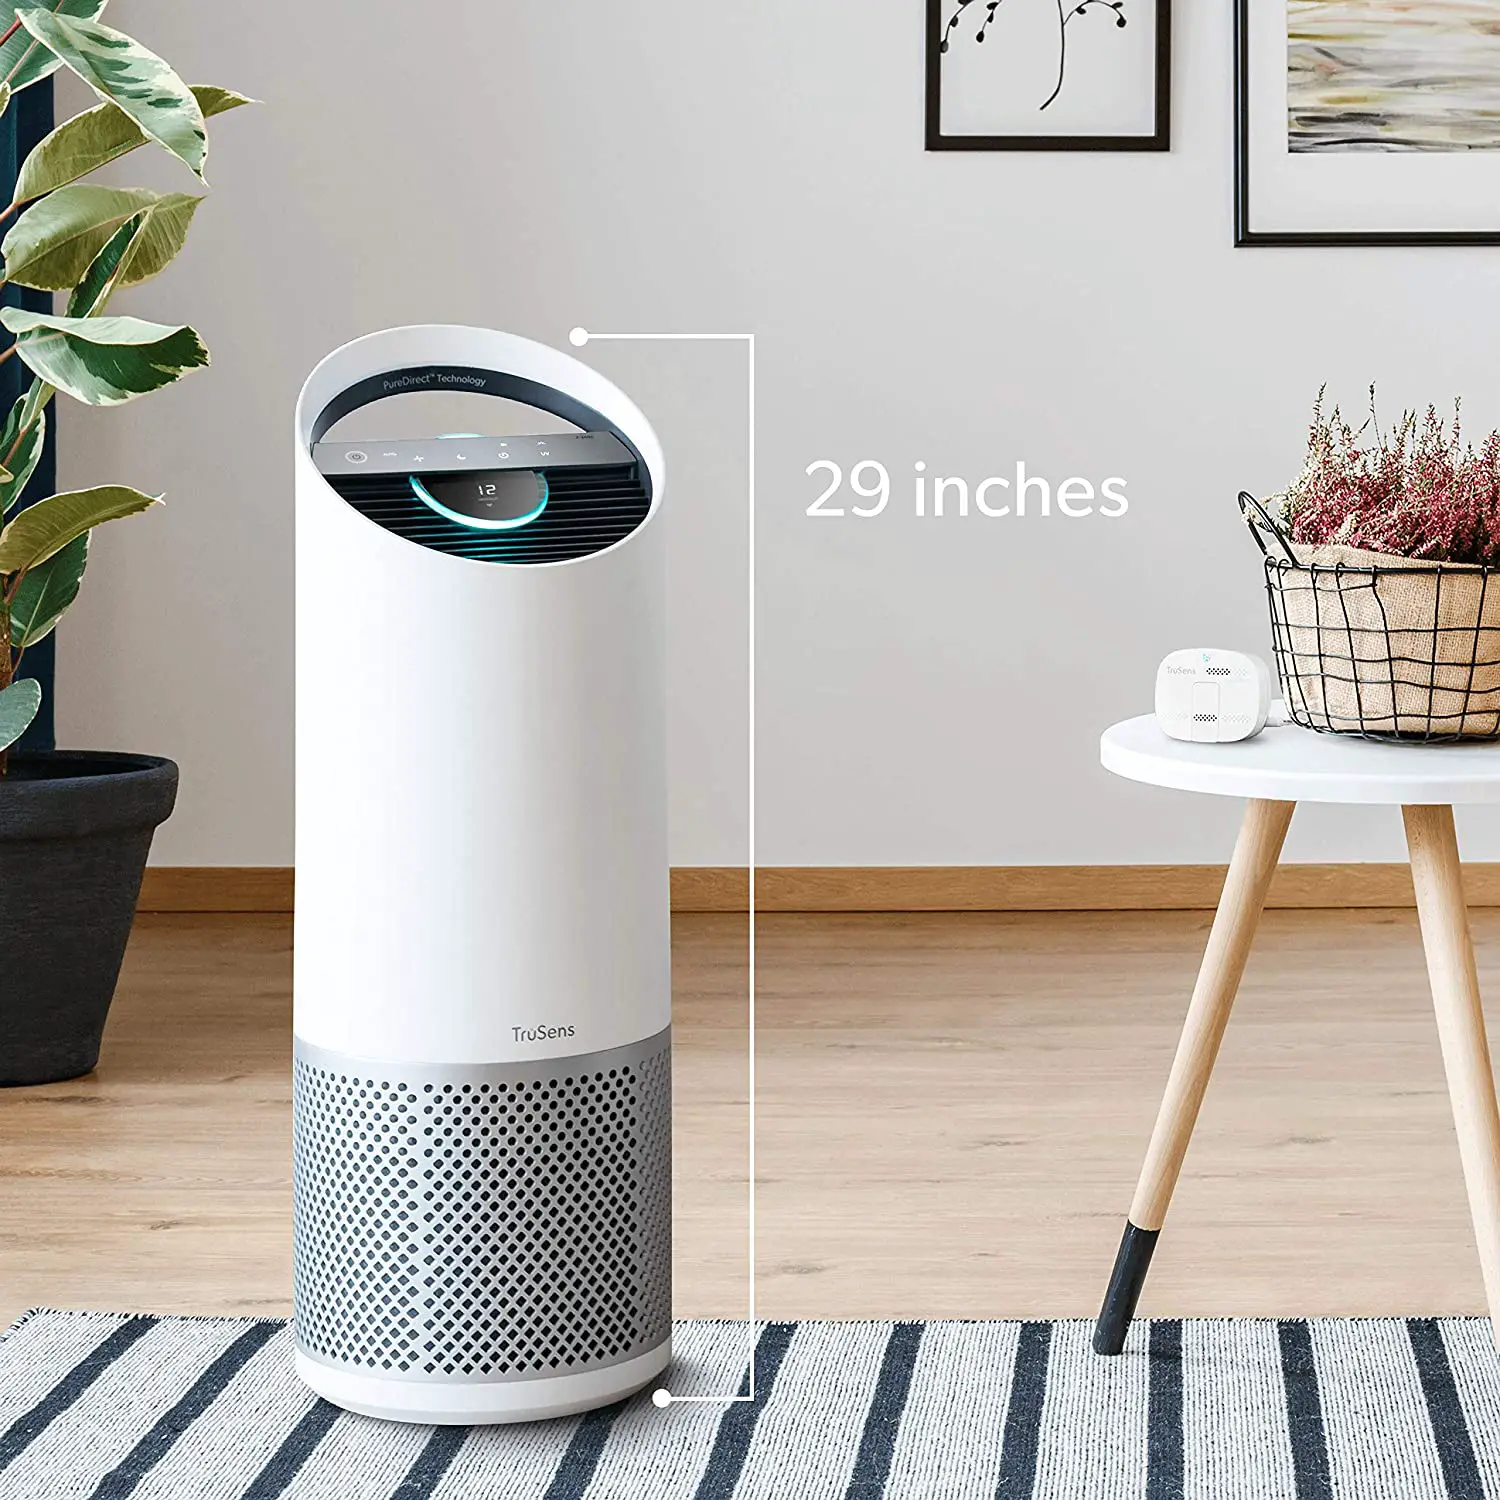 Here Are The Best Air Purifiers For Mold, Mildew, And Virus Used At ...